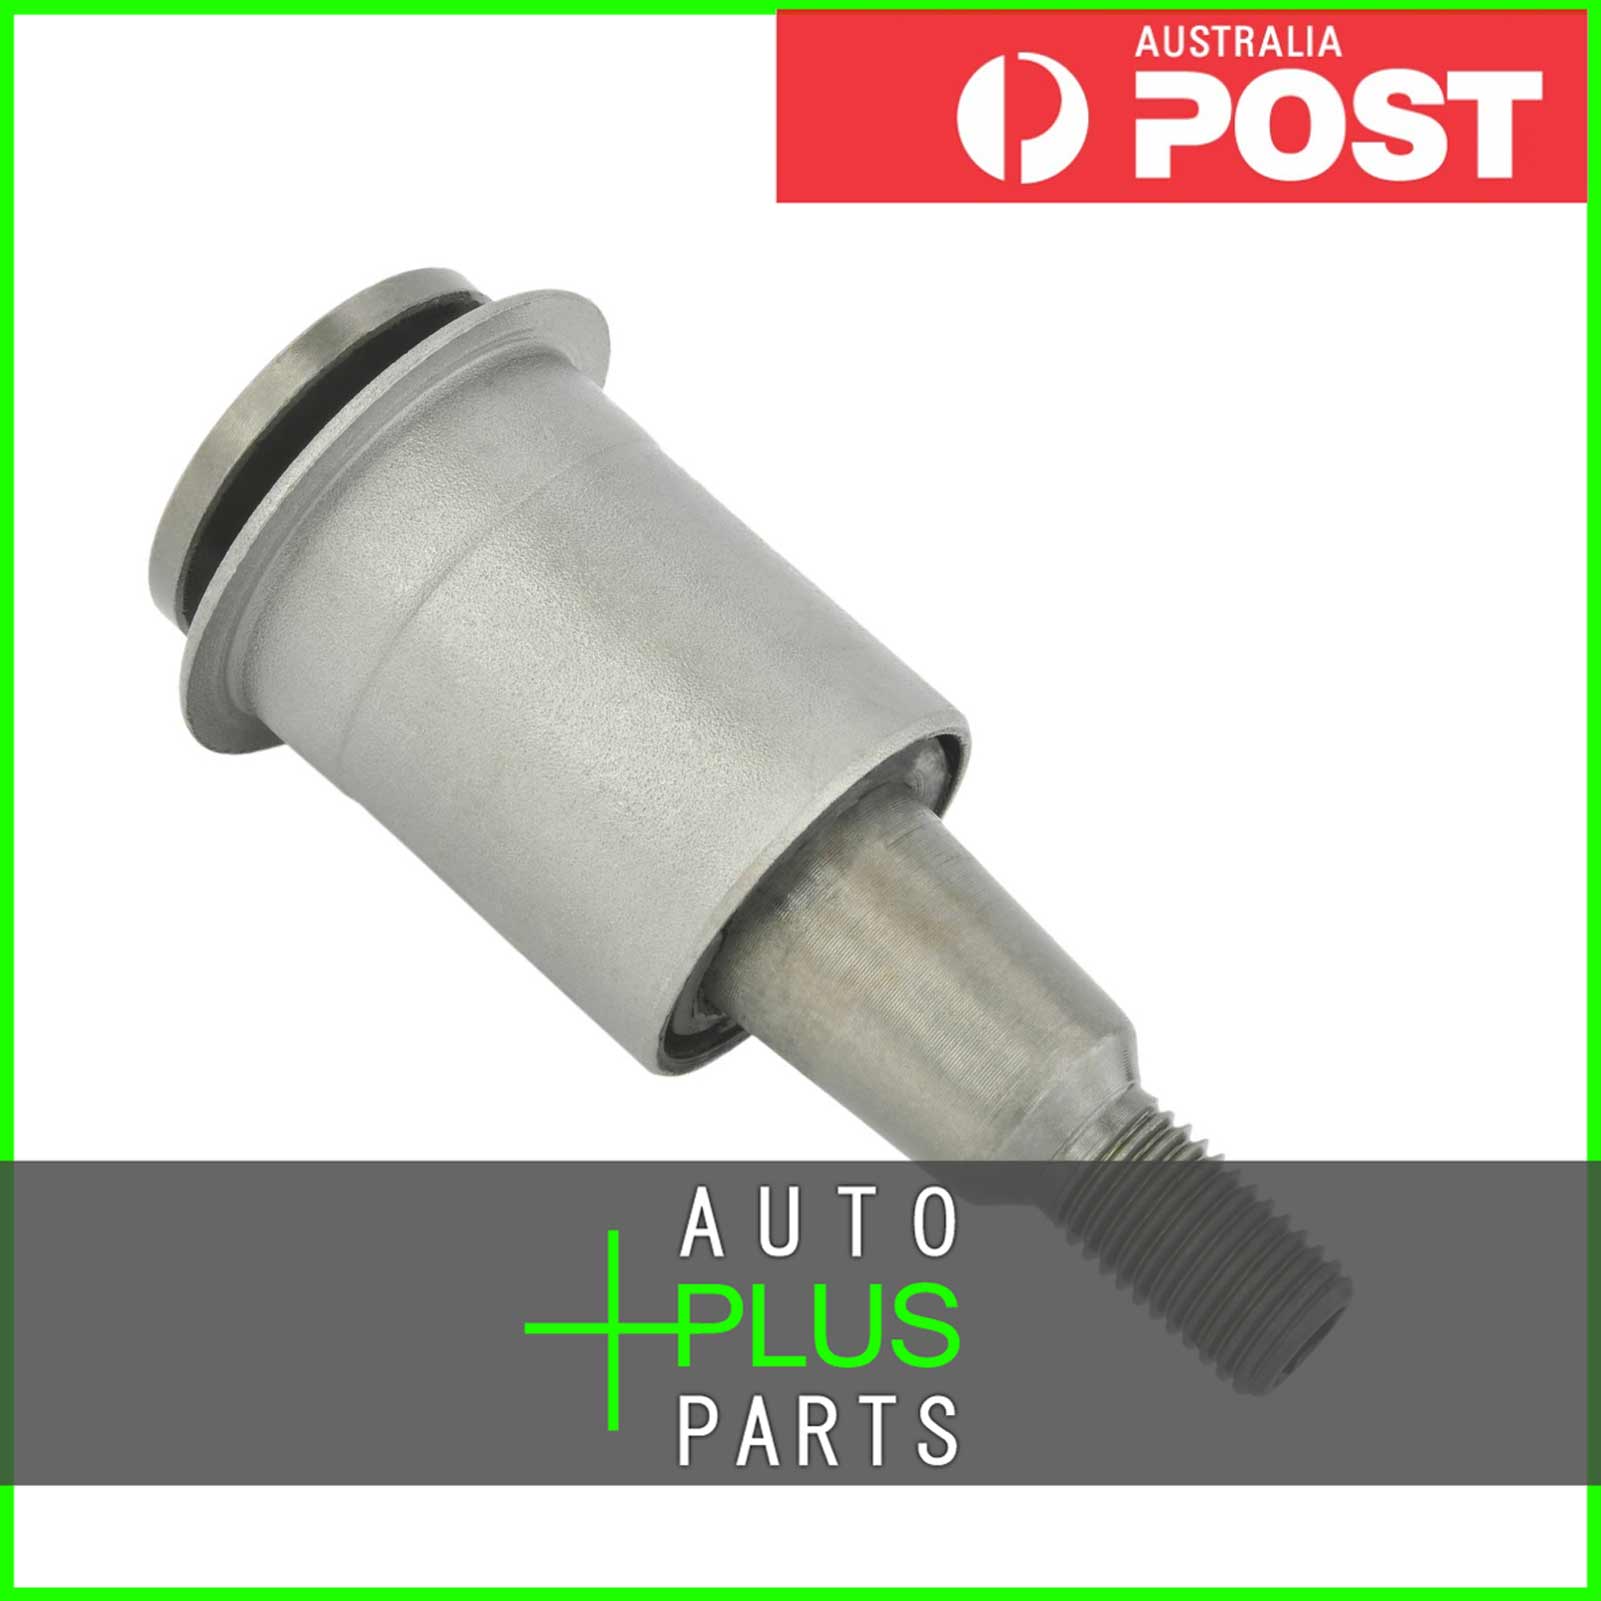 Fits GMC ENVOY XUV SLT (2WD) 2002-2009 - BUSHING, FRONT LOWER CONTROL ARM Product Photo